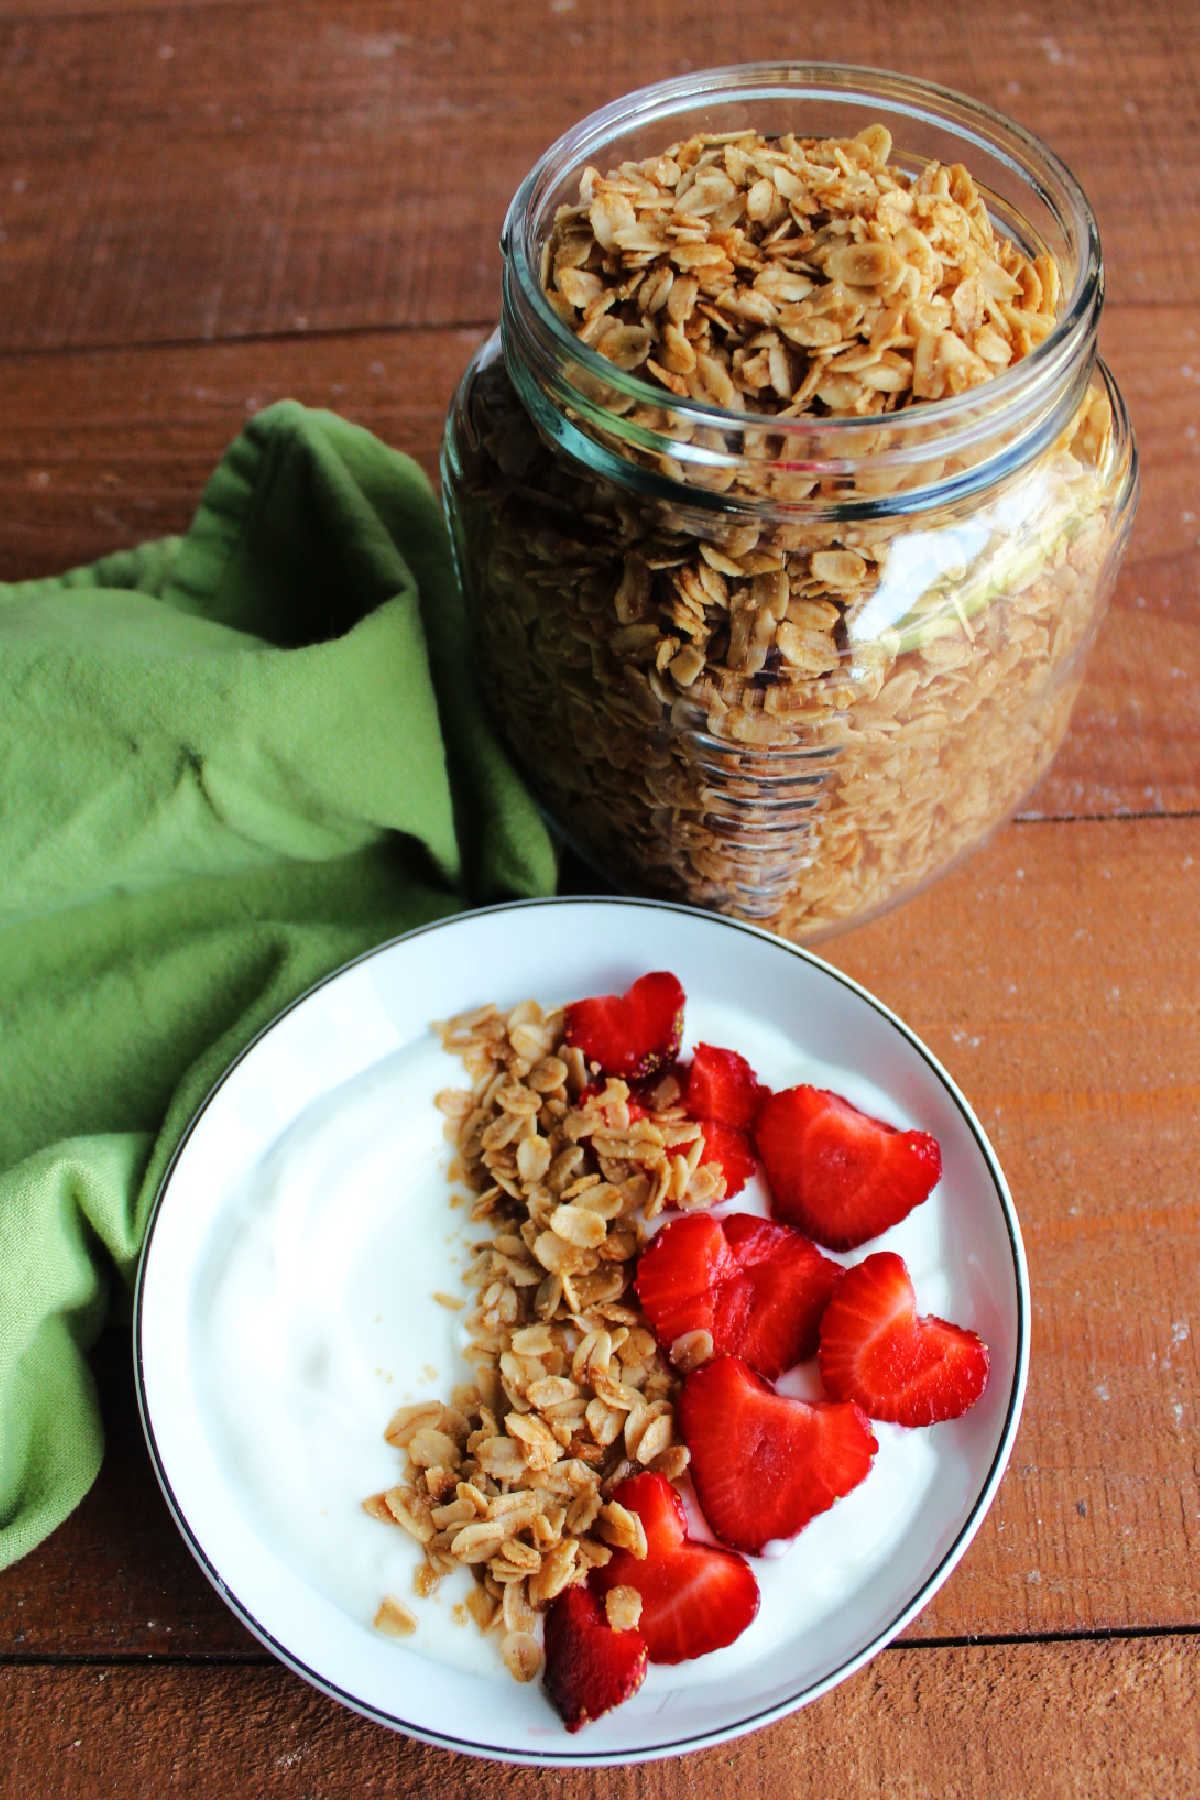 Jar of crock pot maple cinnamon granola next to bowl of yogurt topped with berries and granola.